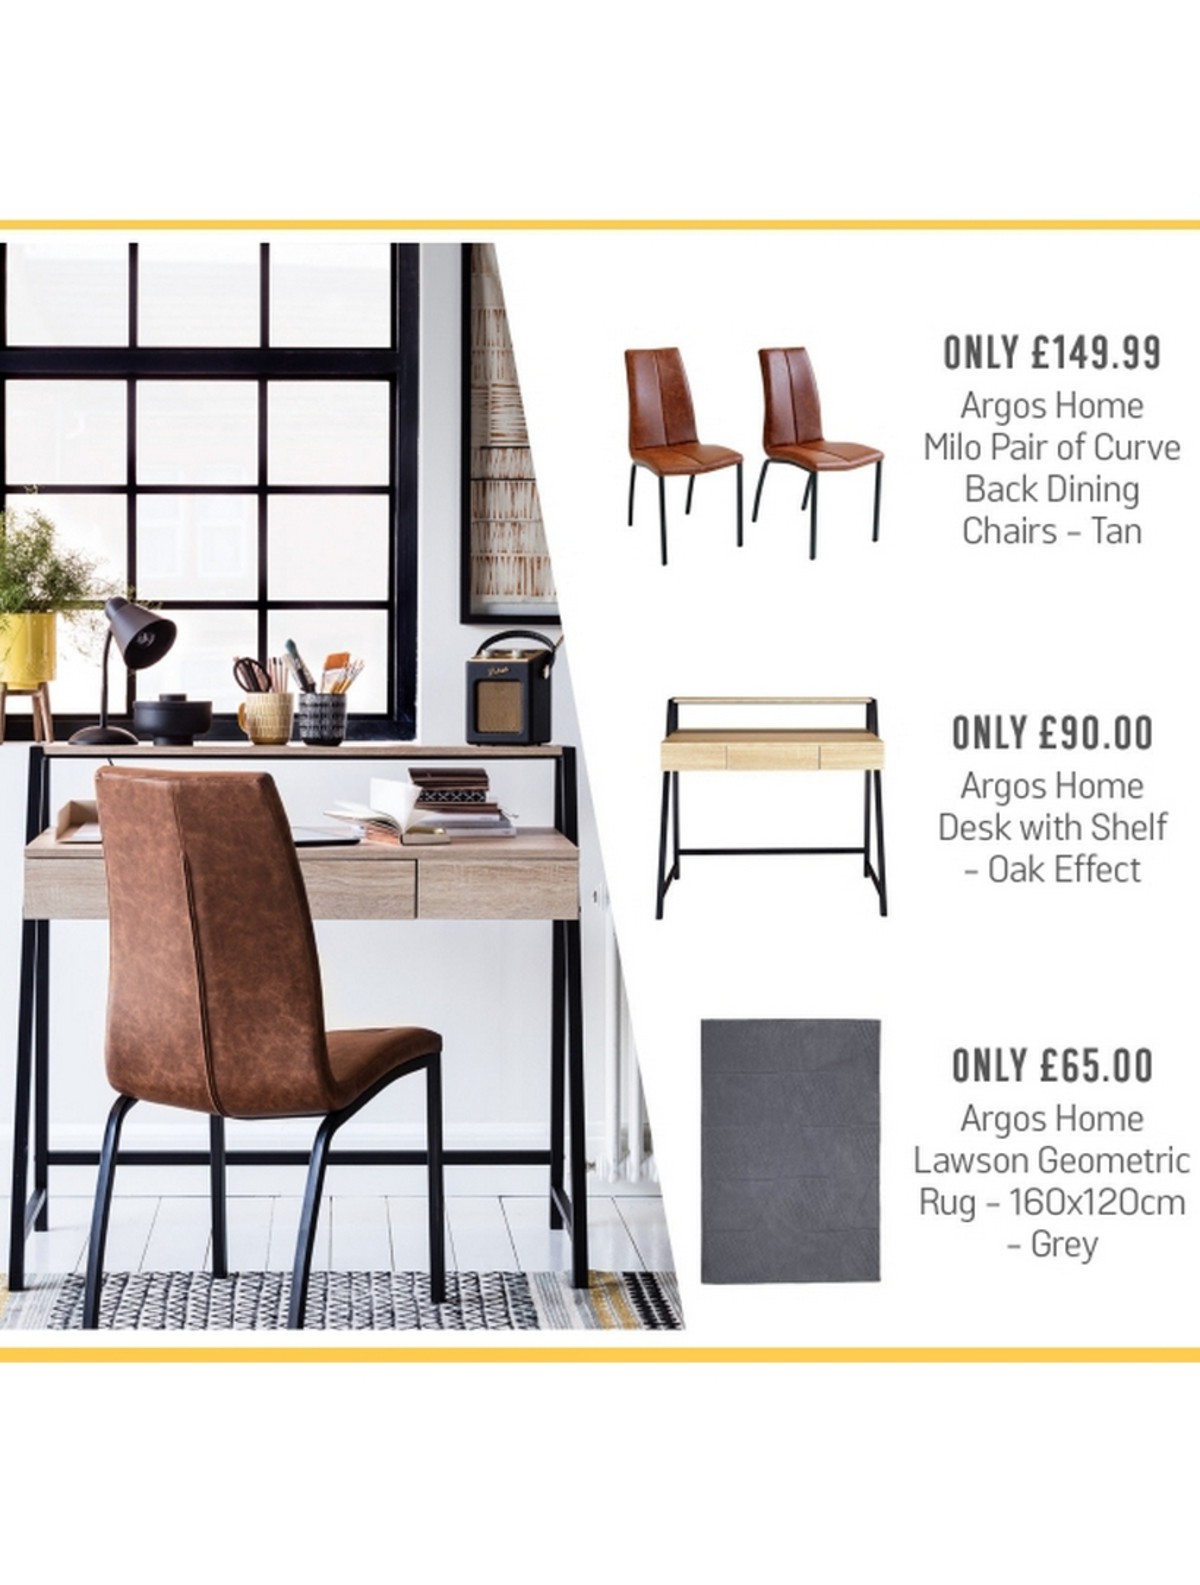 Argos Introducing Global Monochrome Offers from 20 May